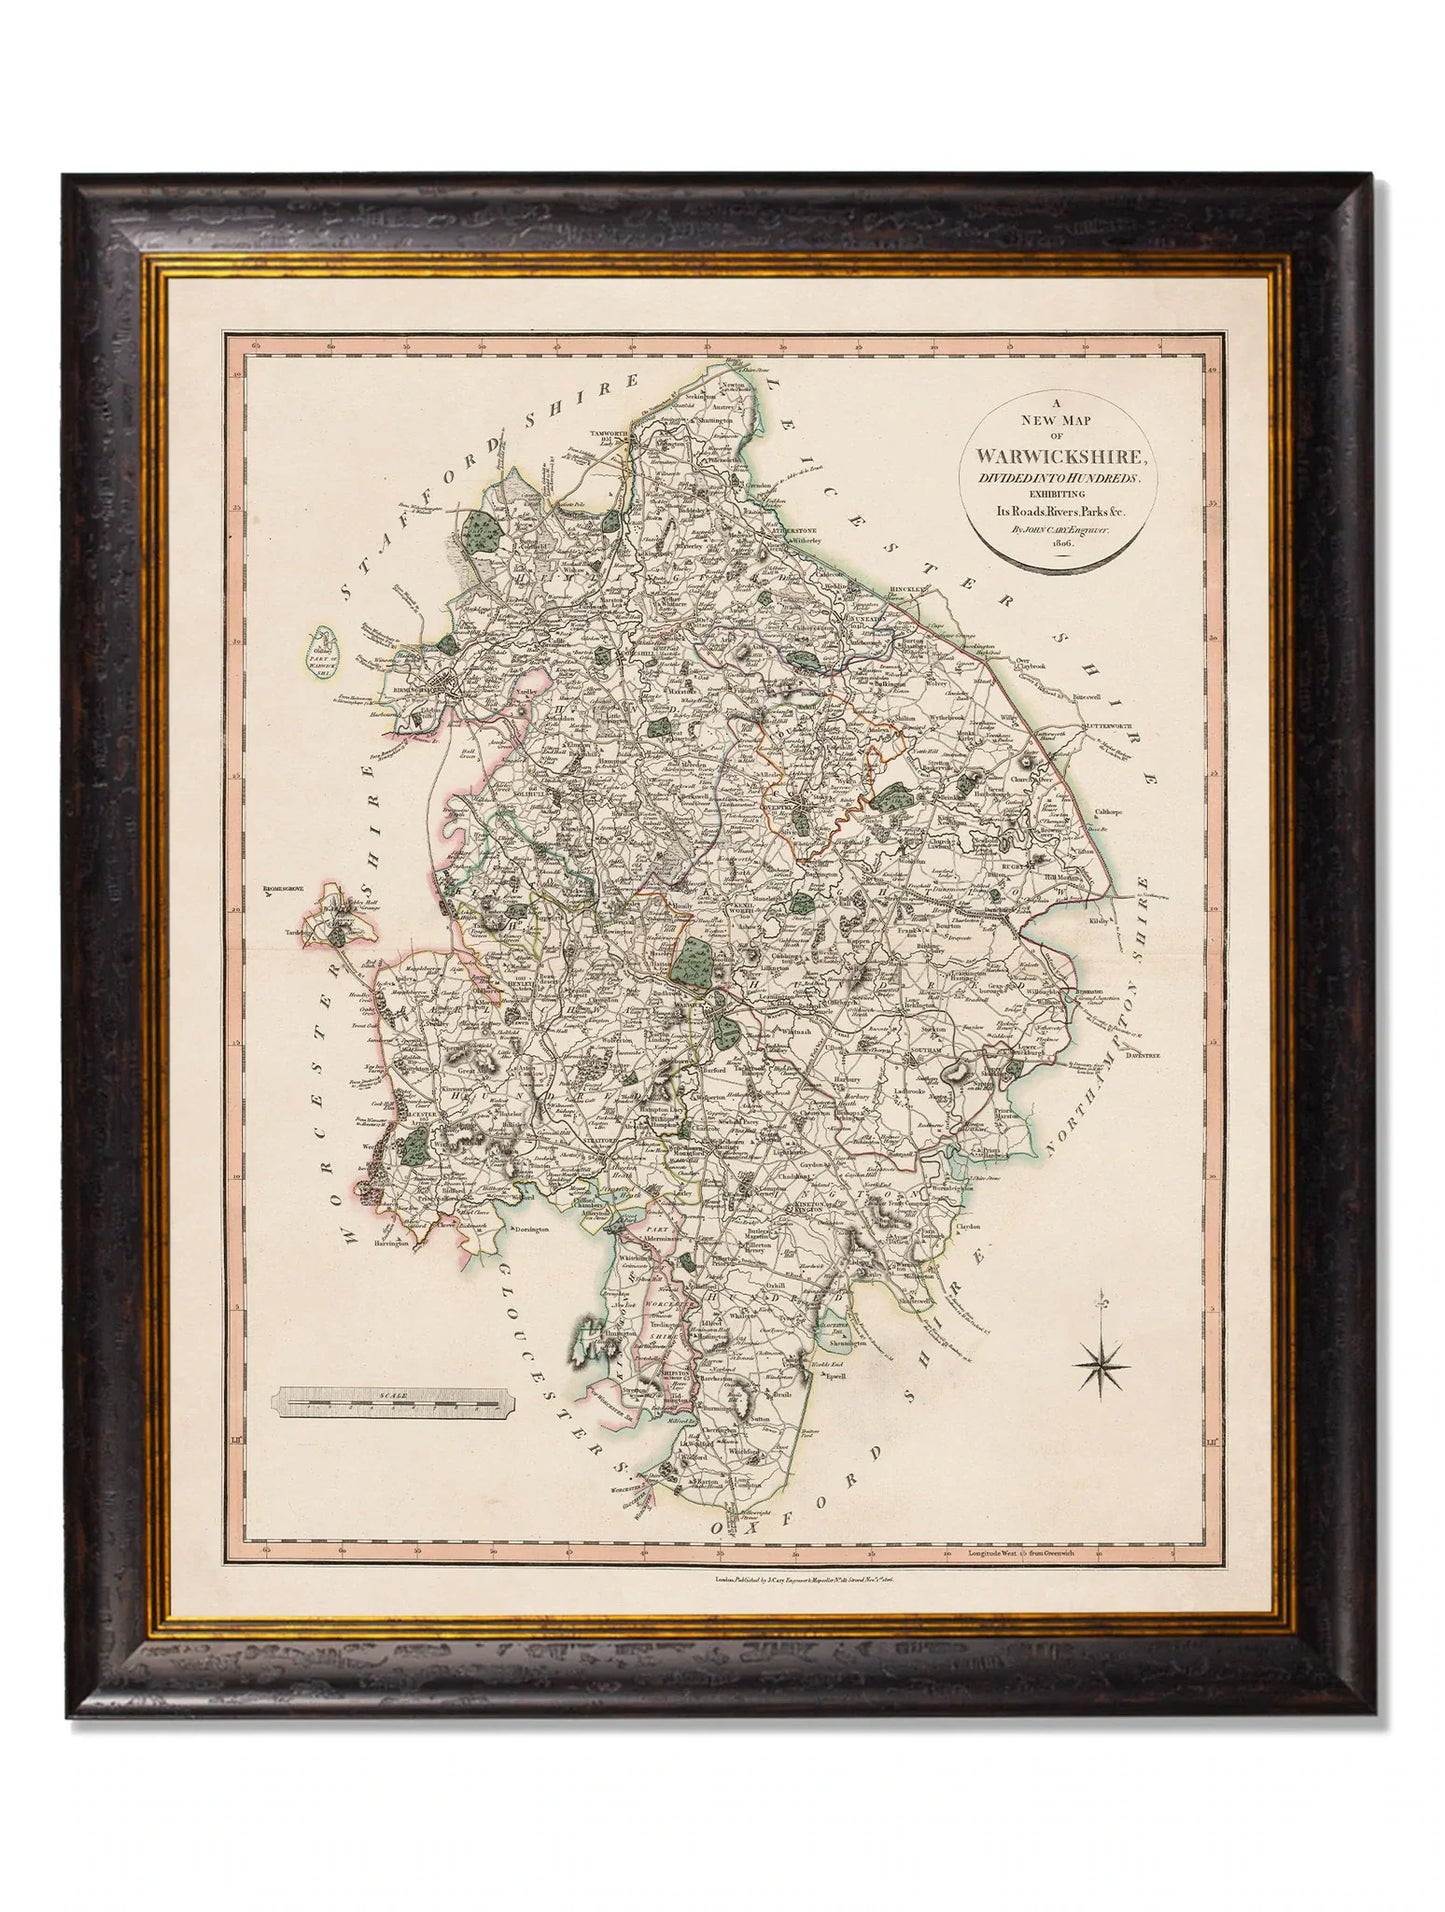 C.1806 County Maps Of England Frame for sale - Woodcock and Cavendish